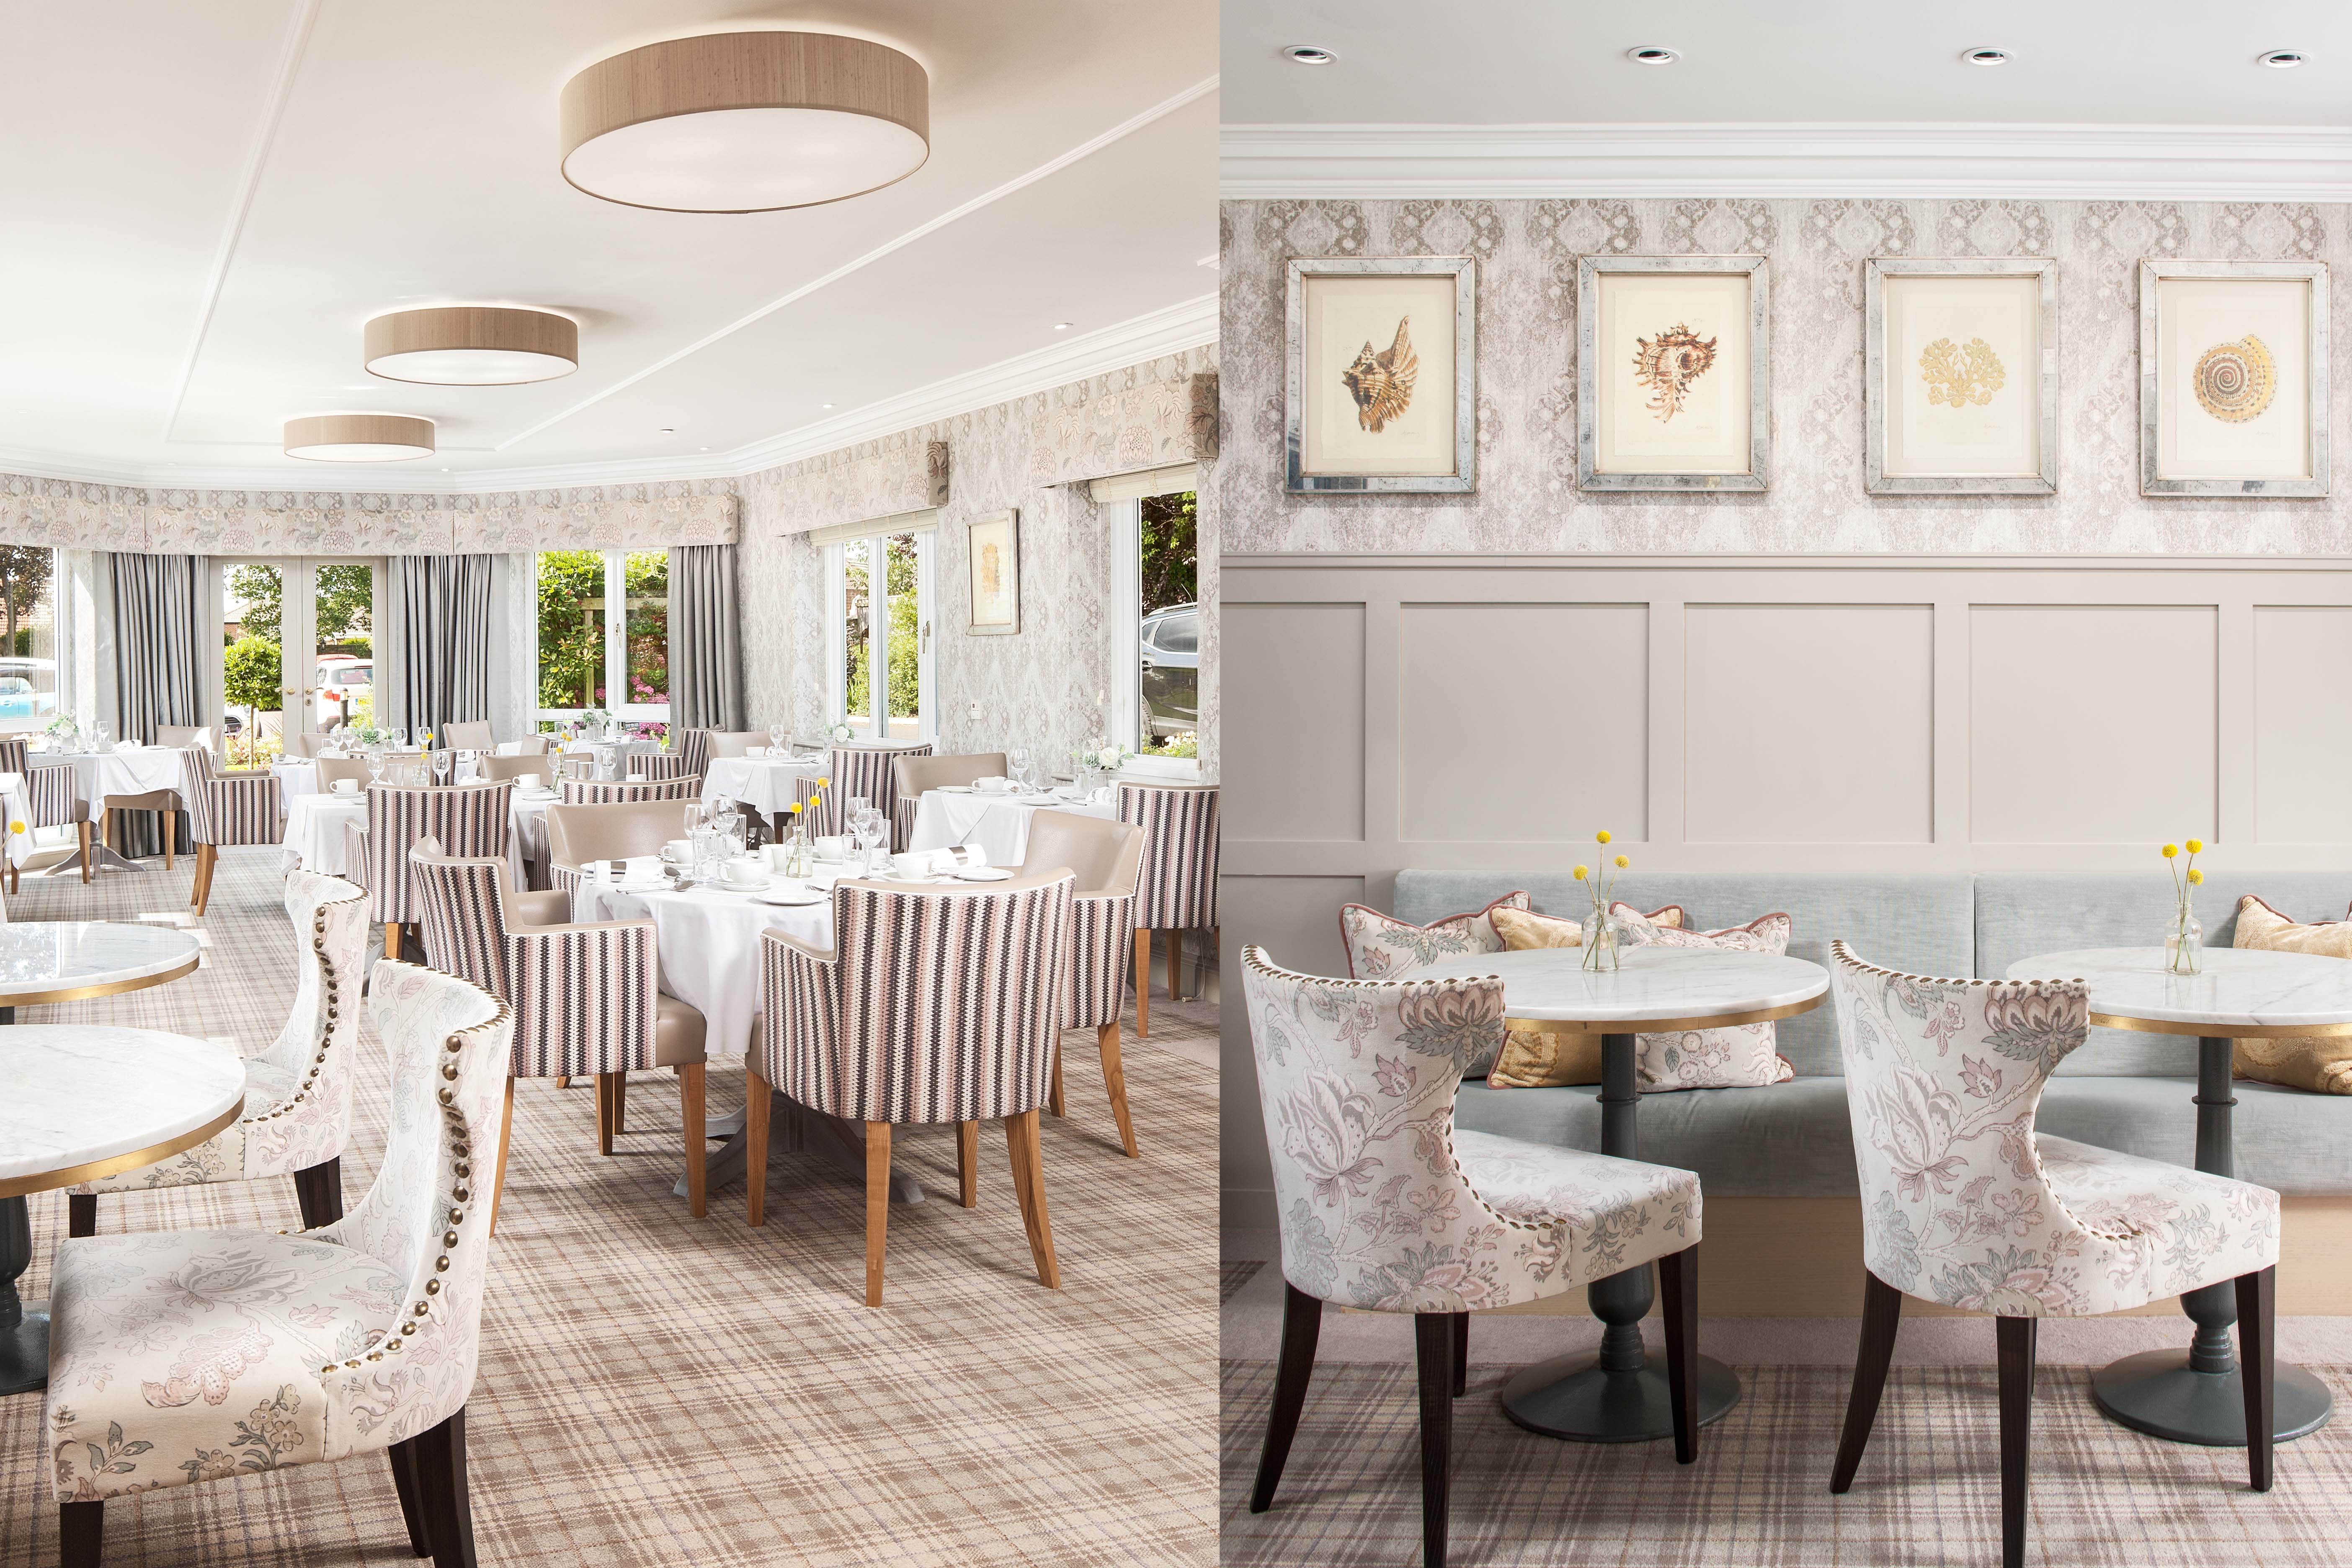 Bernard Interiors project for Hadrian Healthcare at The Manor House in Gosforth.